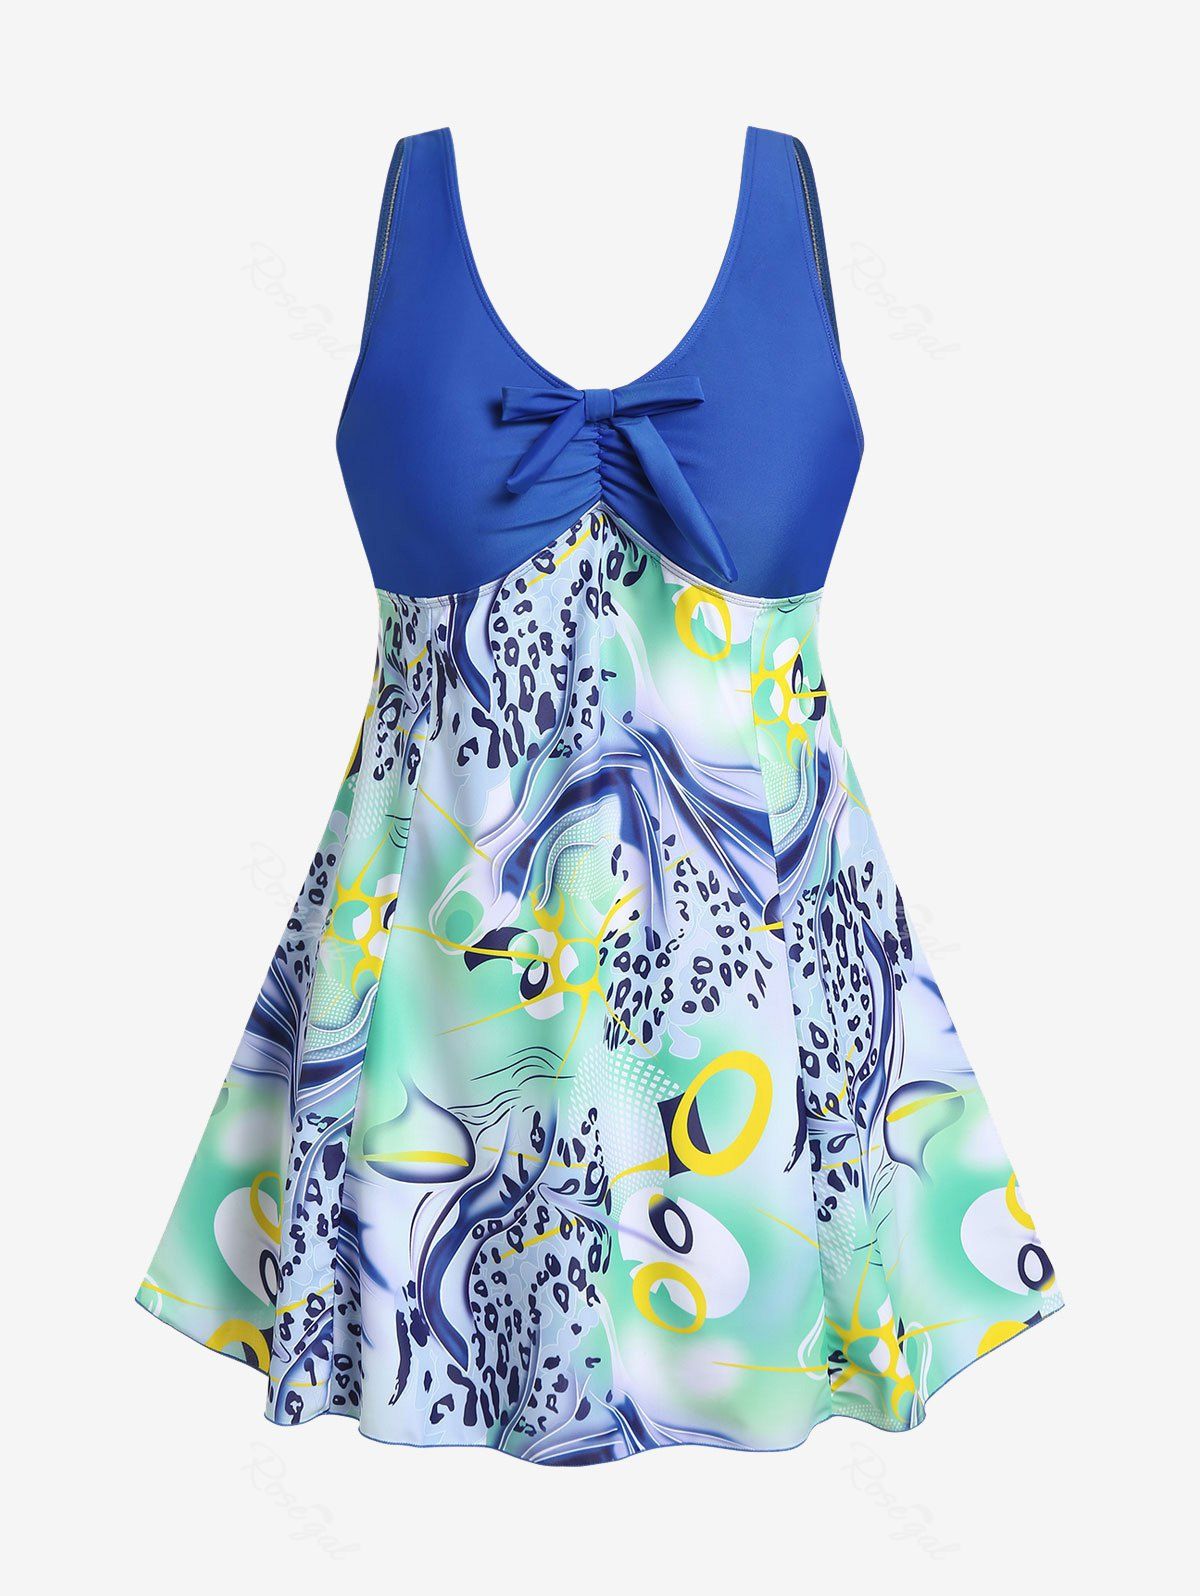 New Plus Size Mixed Print Ruched Cutout Bowknot Padded Modest Tankini Top Swimsuit  